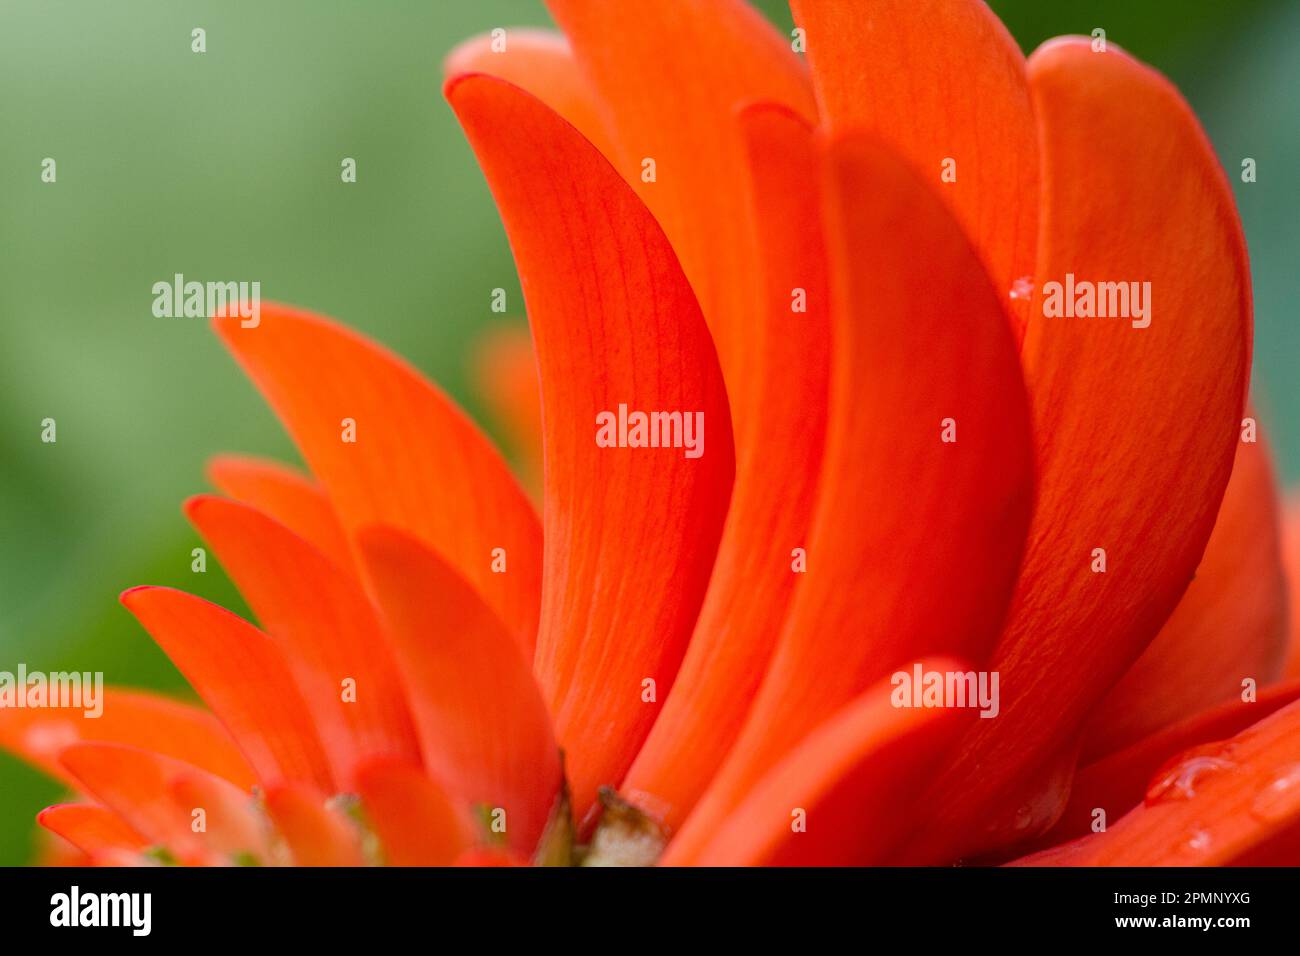 Extreme close-up of a Coral tree flower, Erythrina species; Rano Raraku, Easter Island, Chile Stock Photo